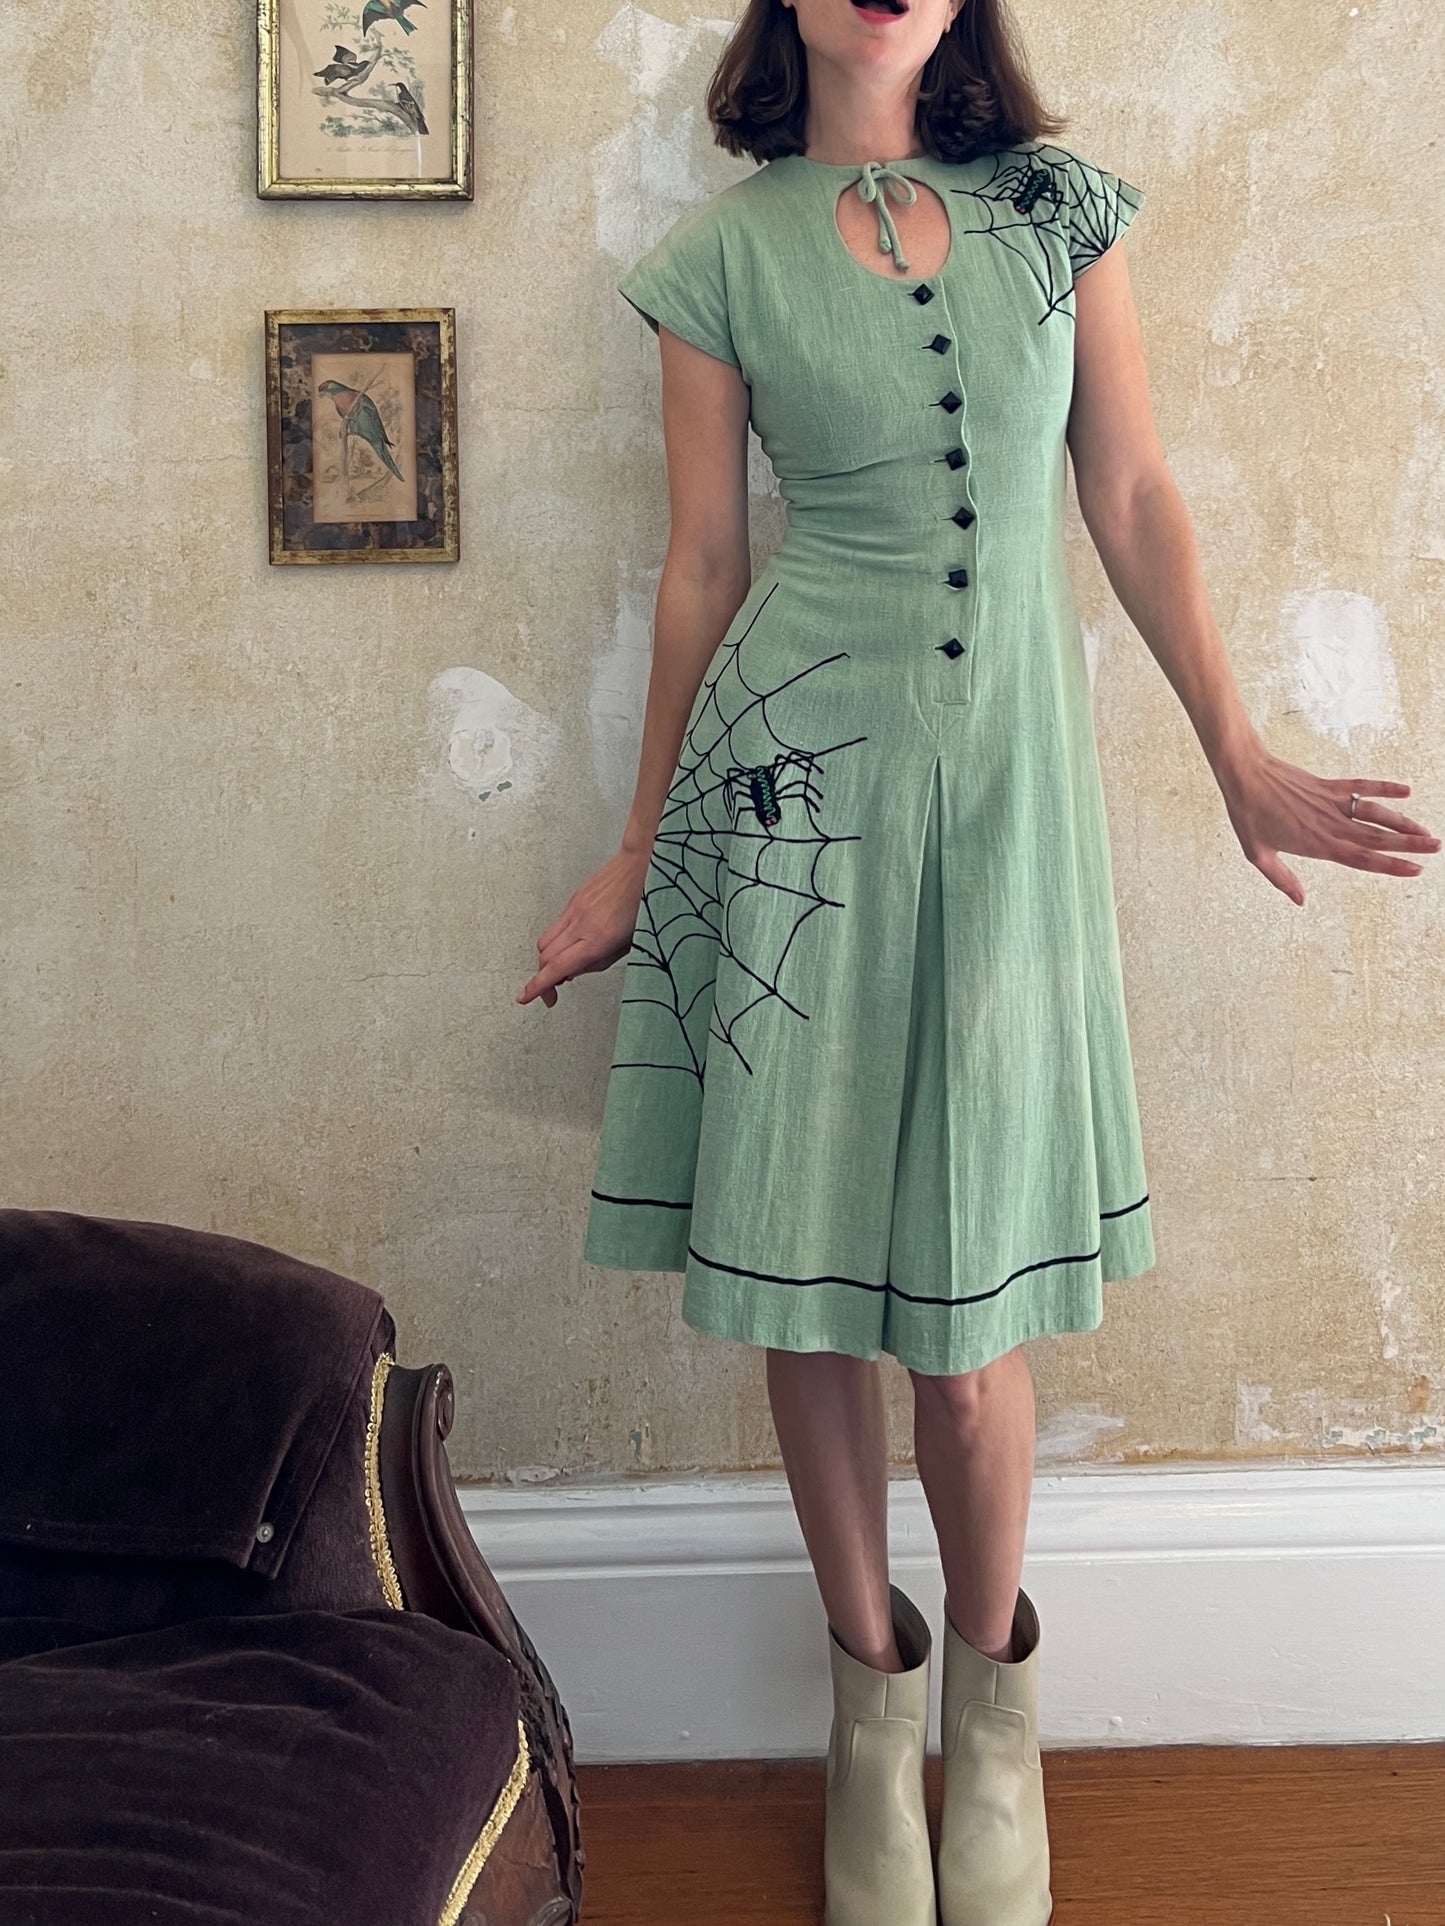 Spiderific! Spooky 1950s Cobweb and Spider Embroidered Dress XS/S